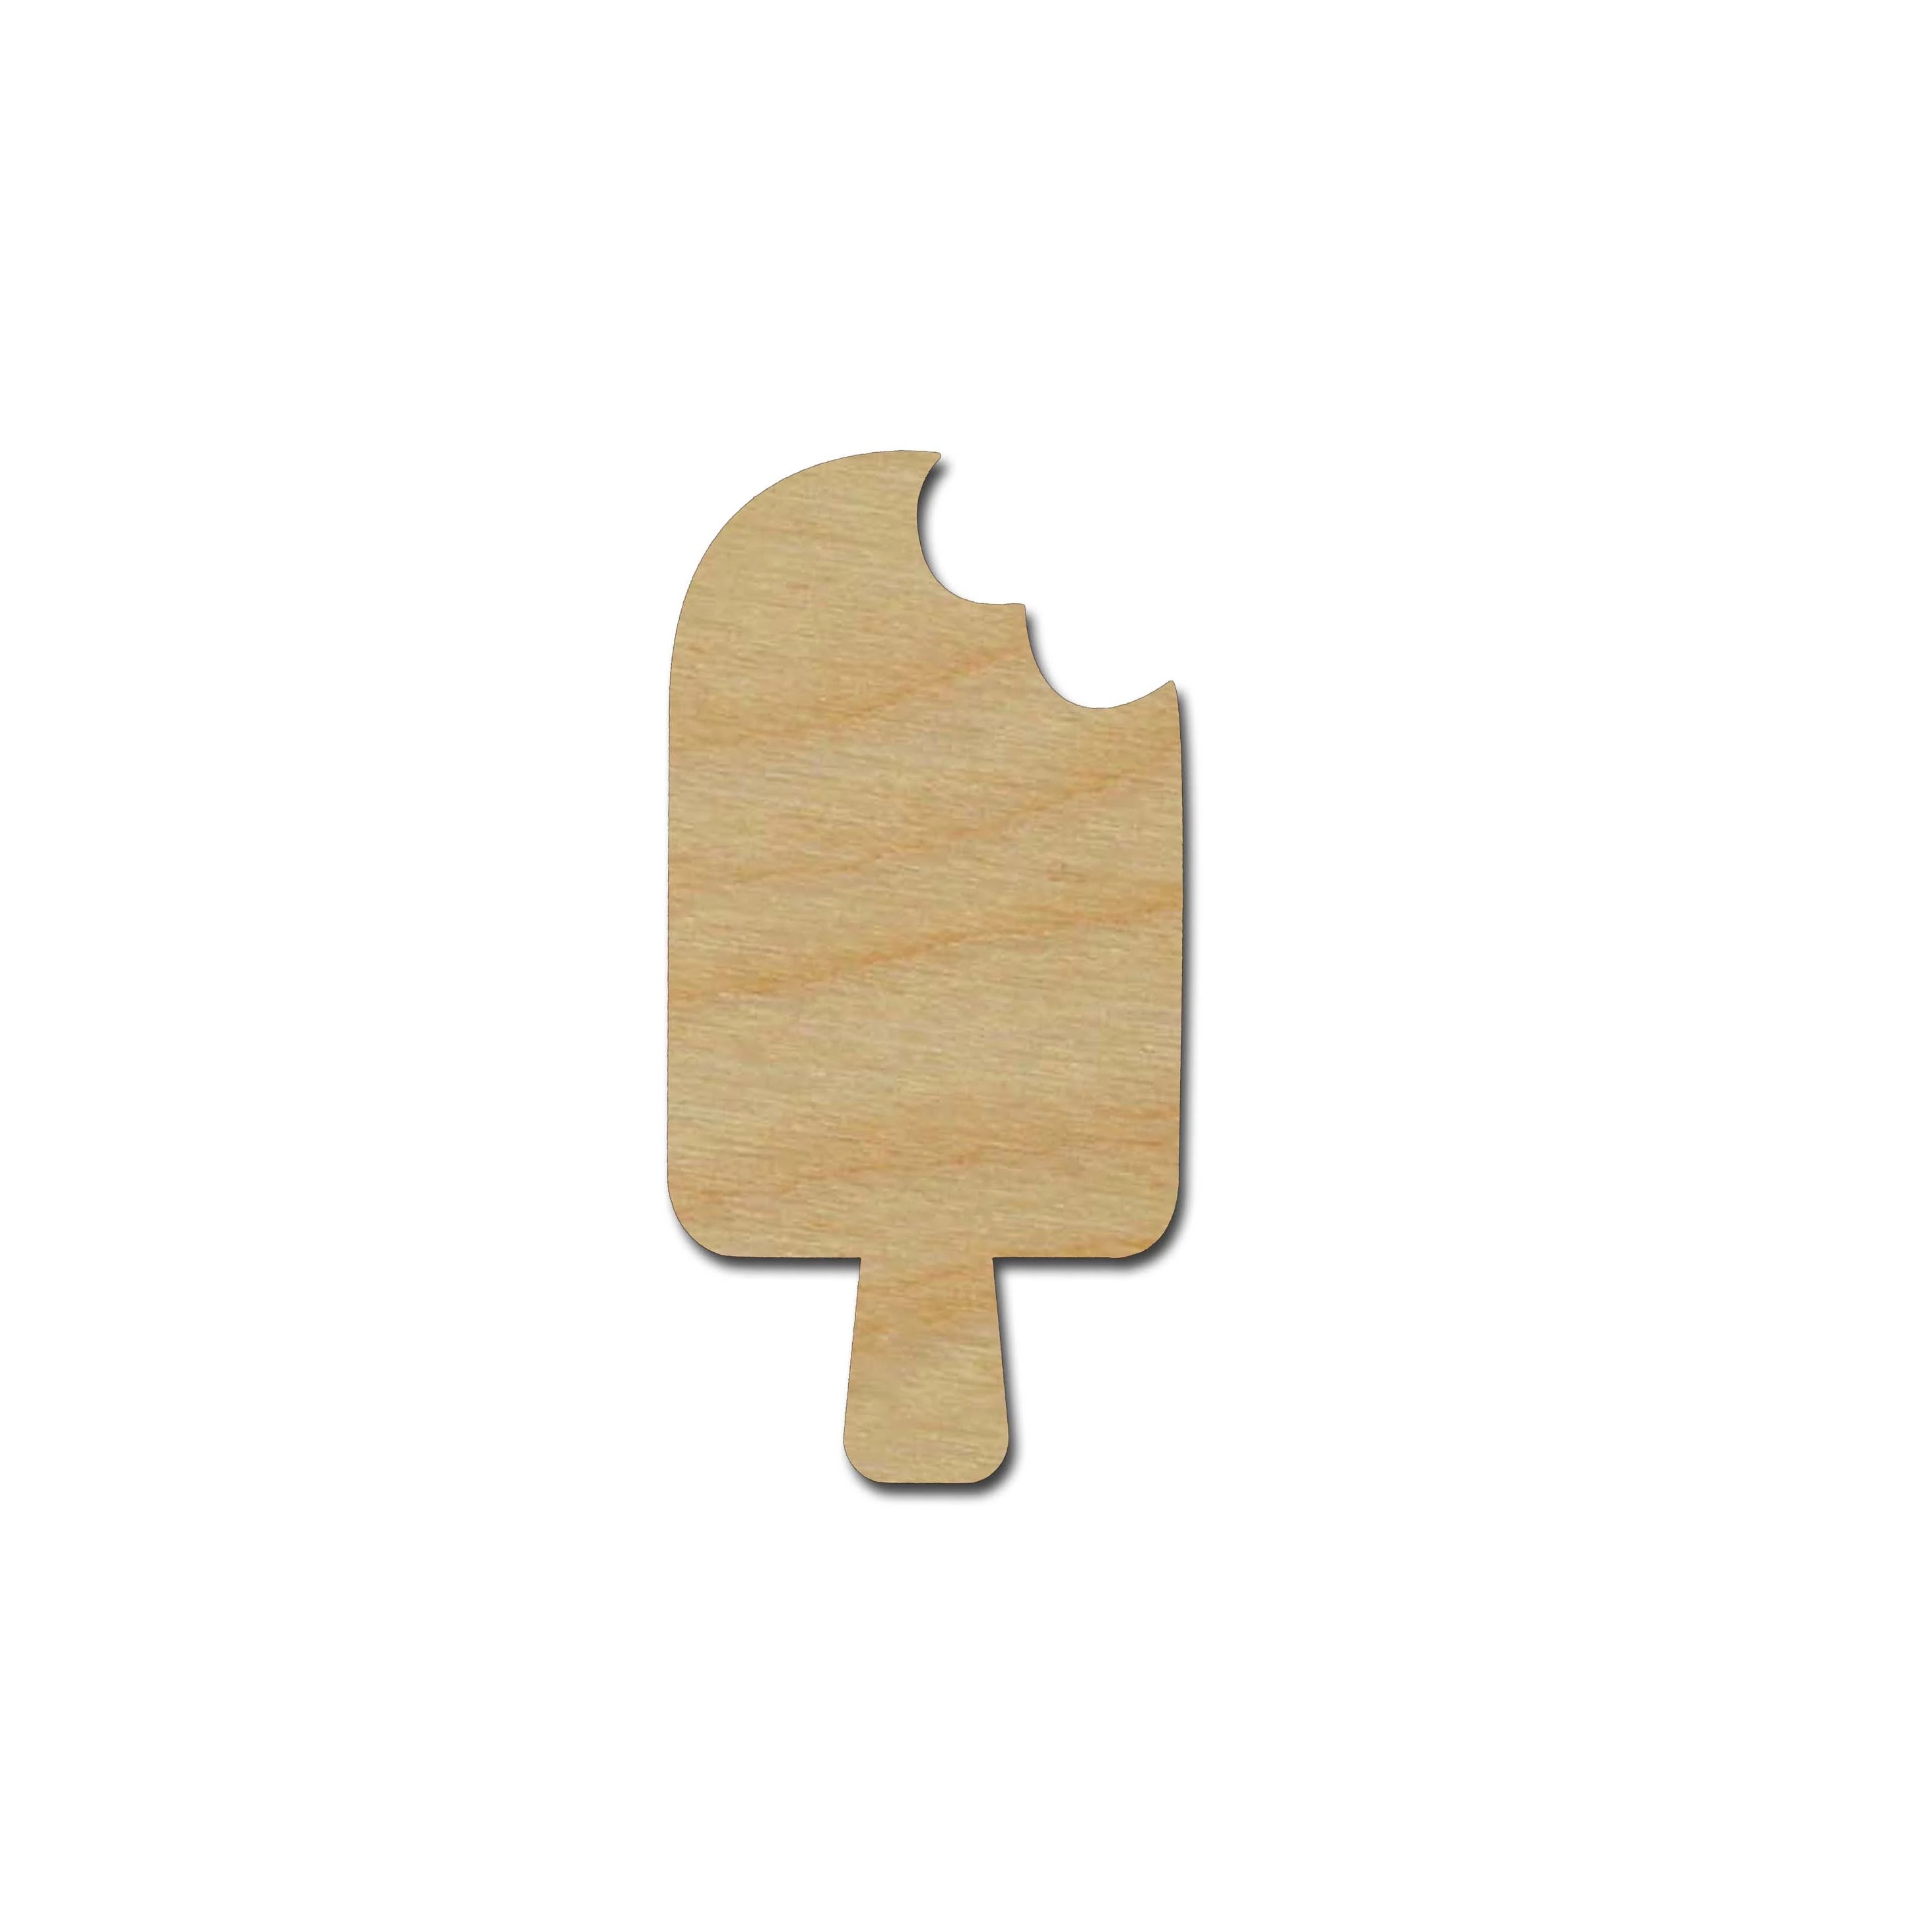 Popsicle Ice Cream Shape Unfinished Wood Cutouts DIY Crafts